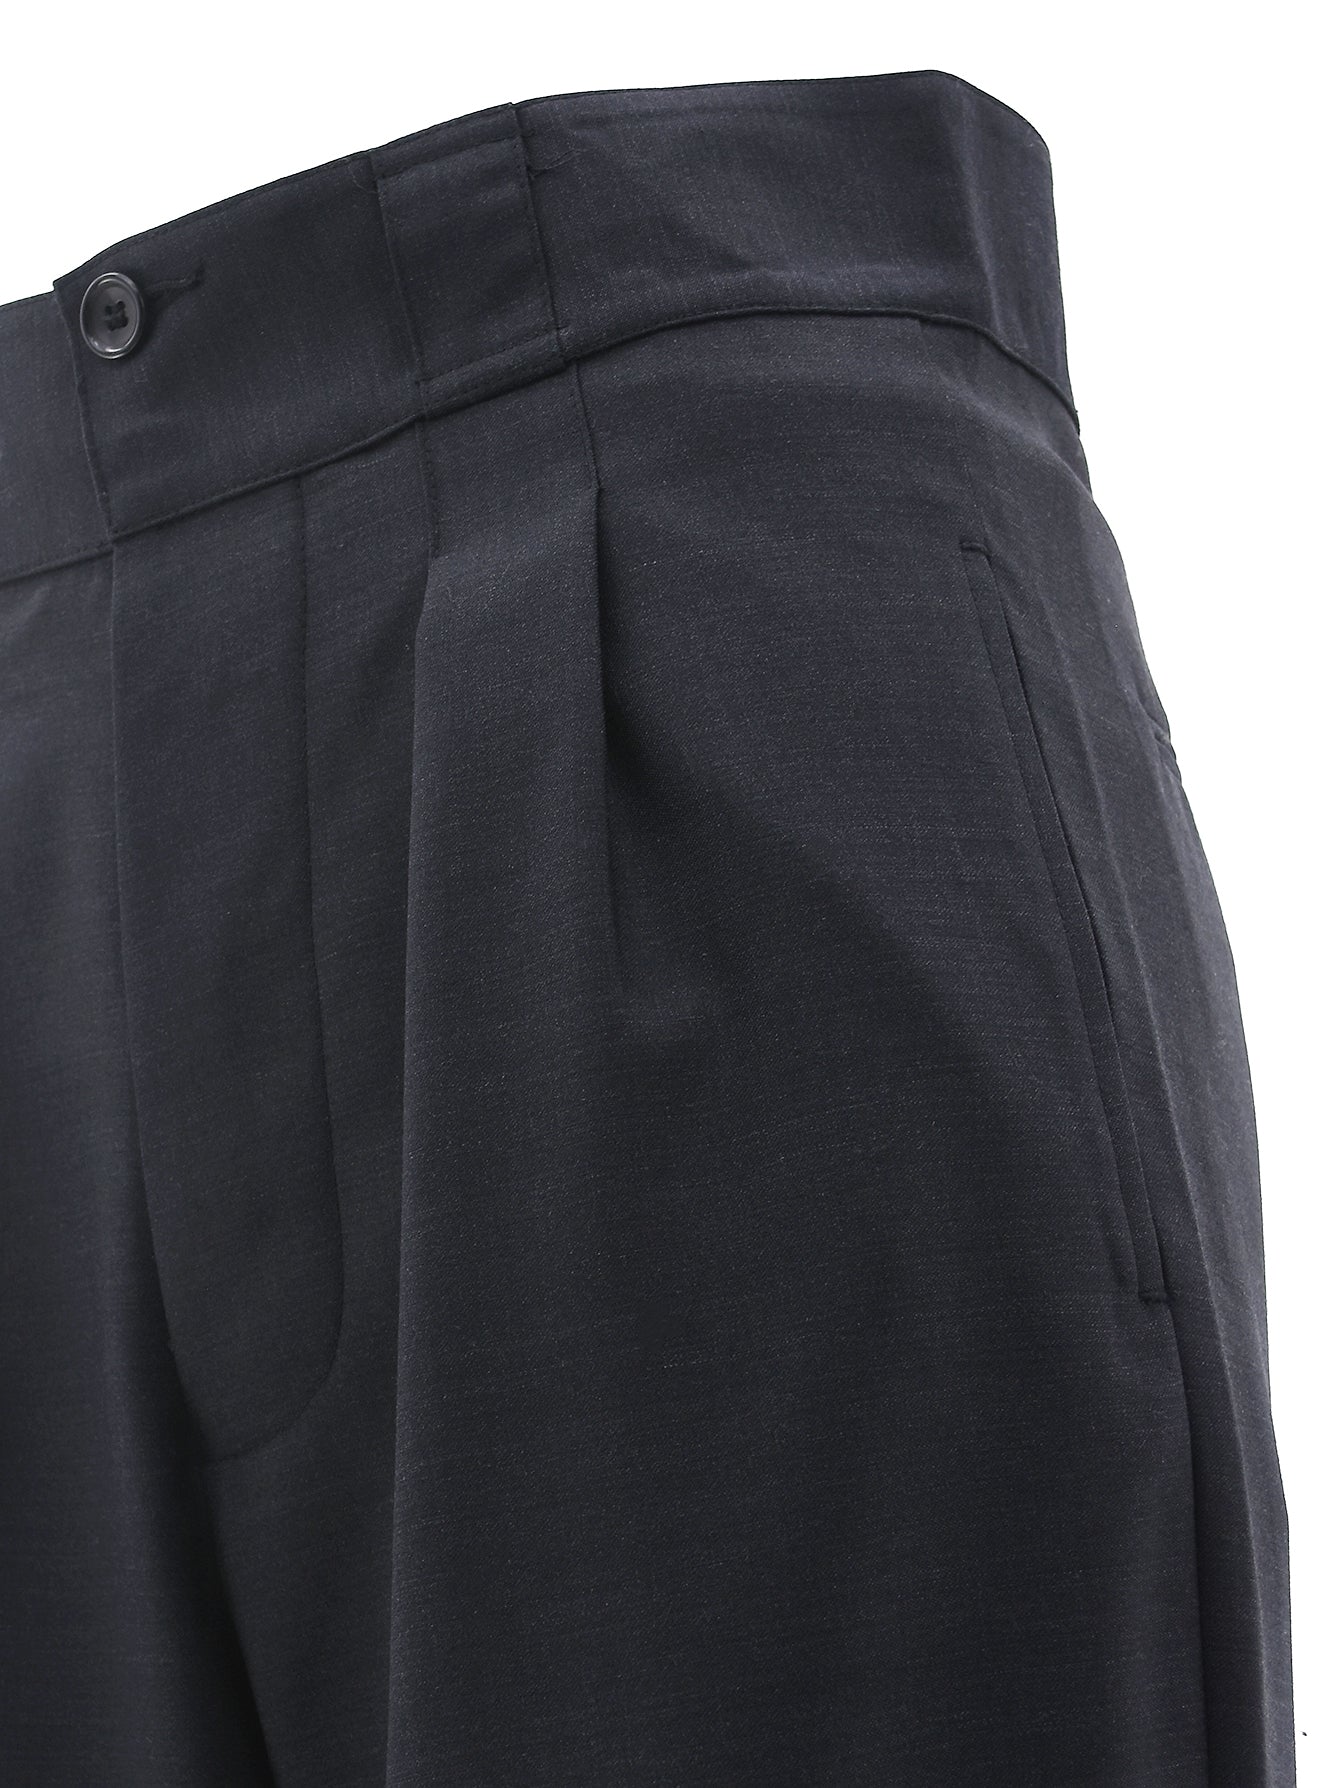 CHARCOAL WOOL PLEATED SUIT TROUSERS